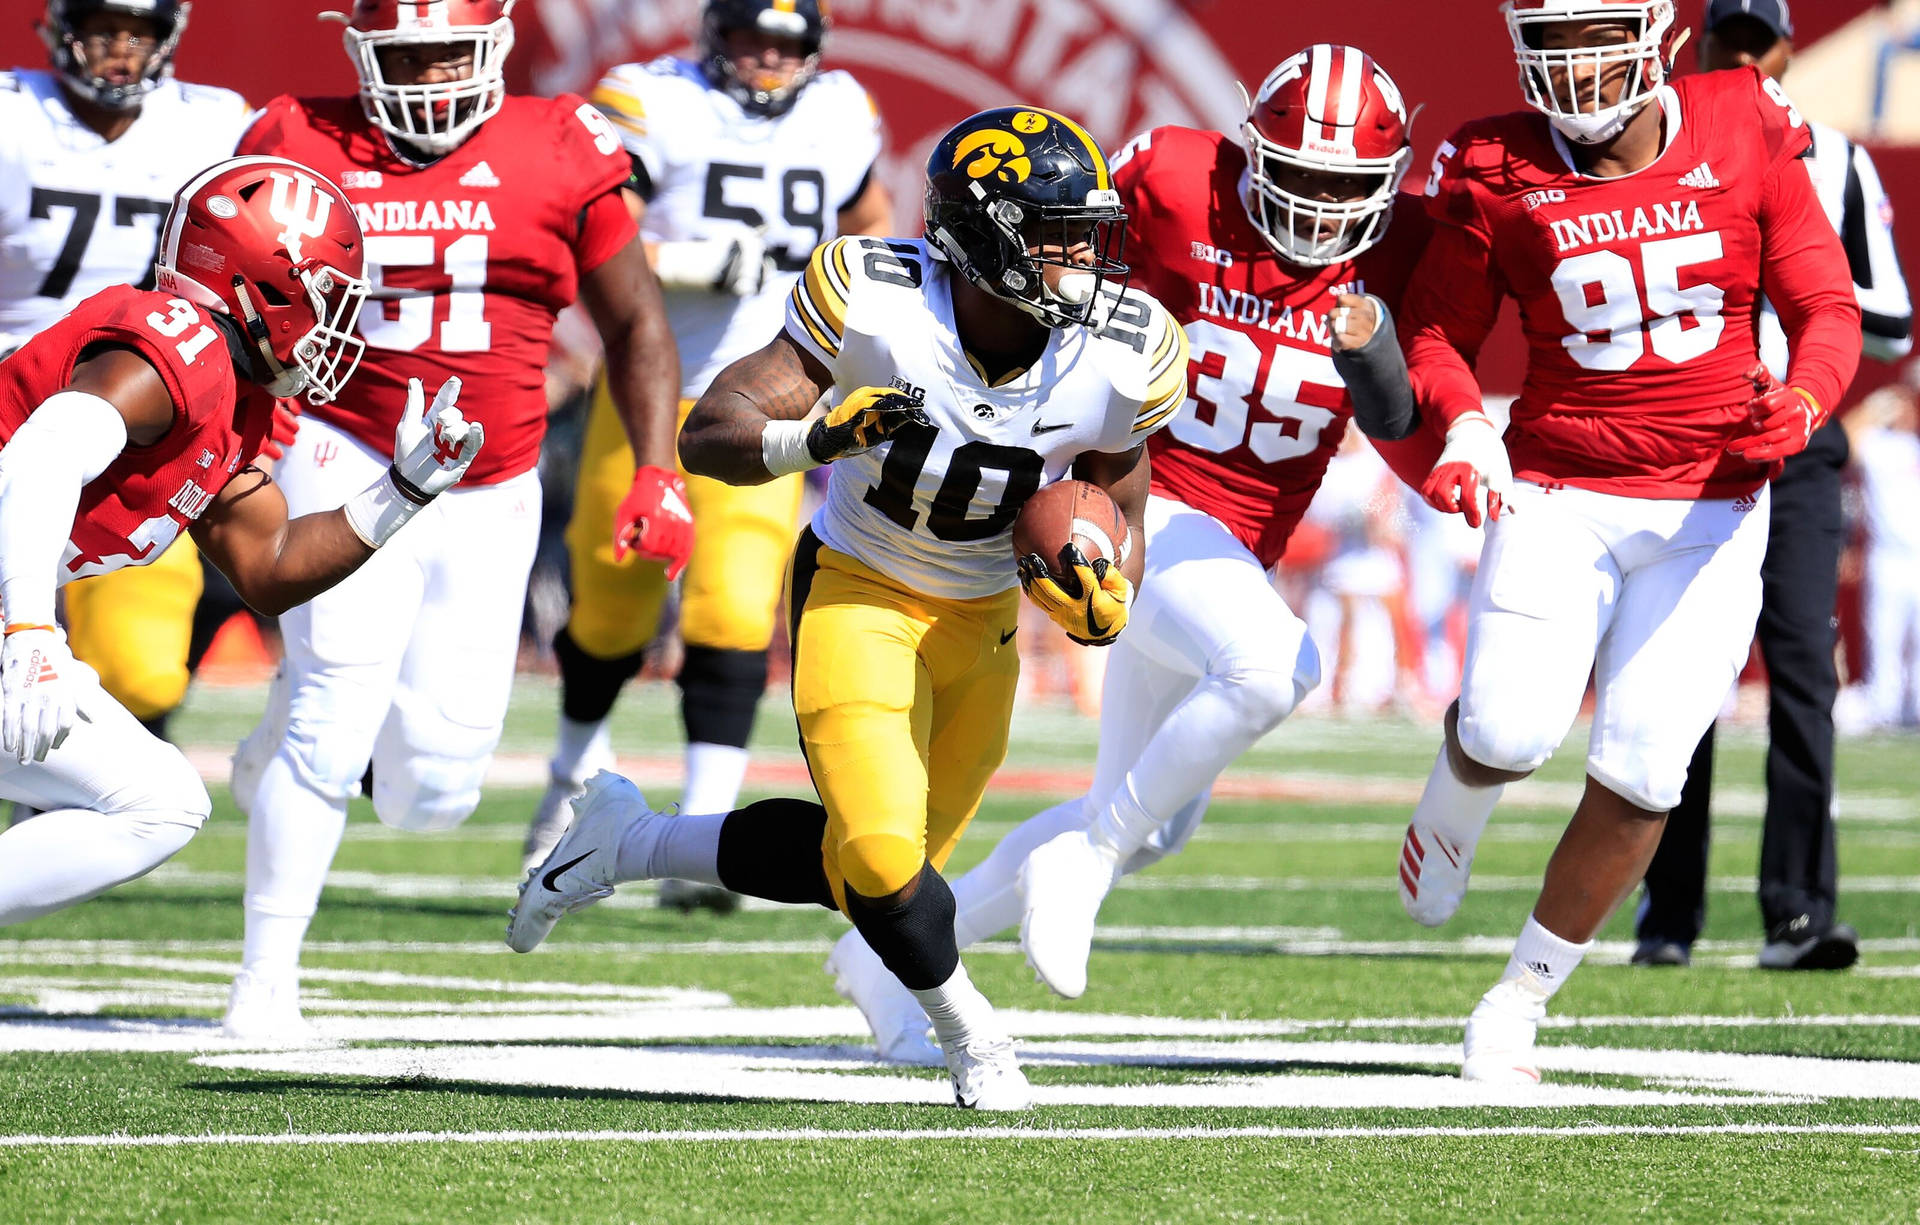 Thrilling Match Between Iowa Hawkeyes And Indiana